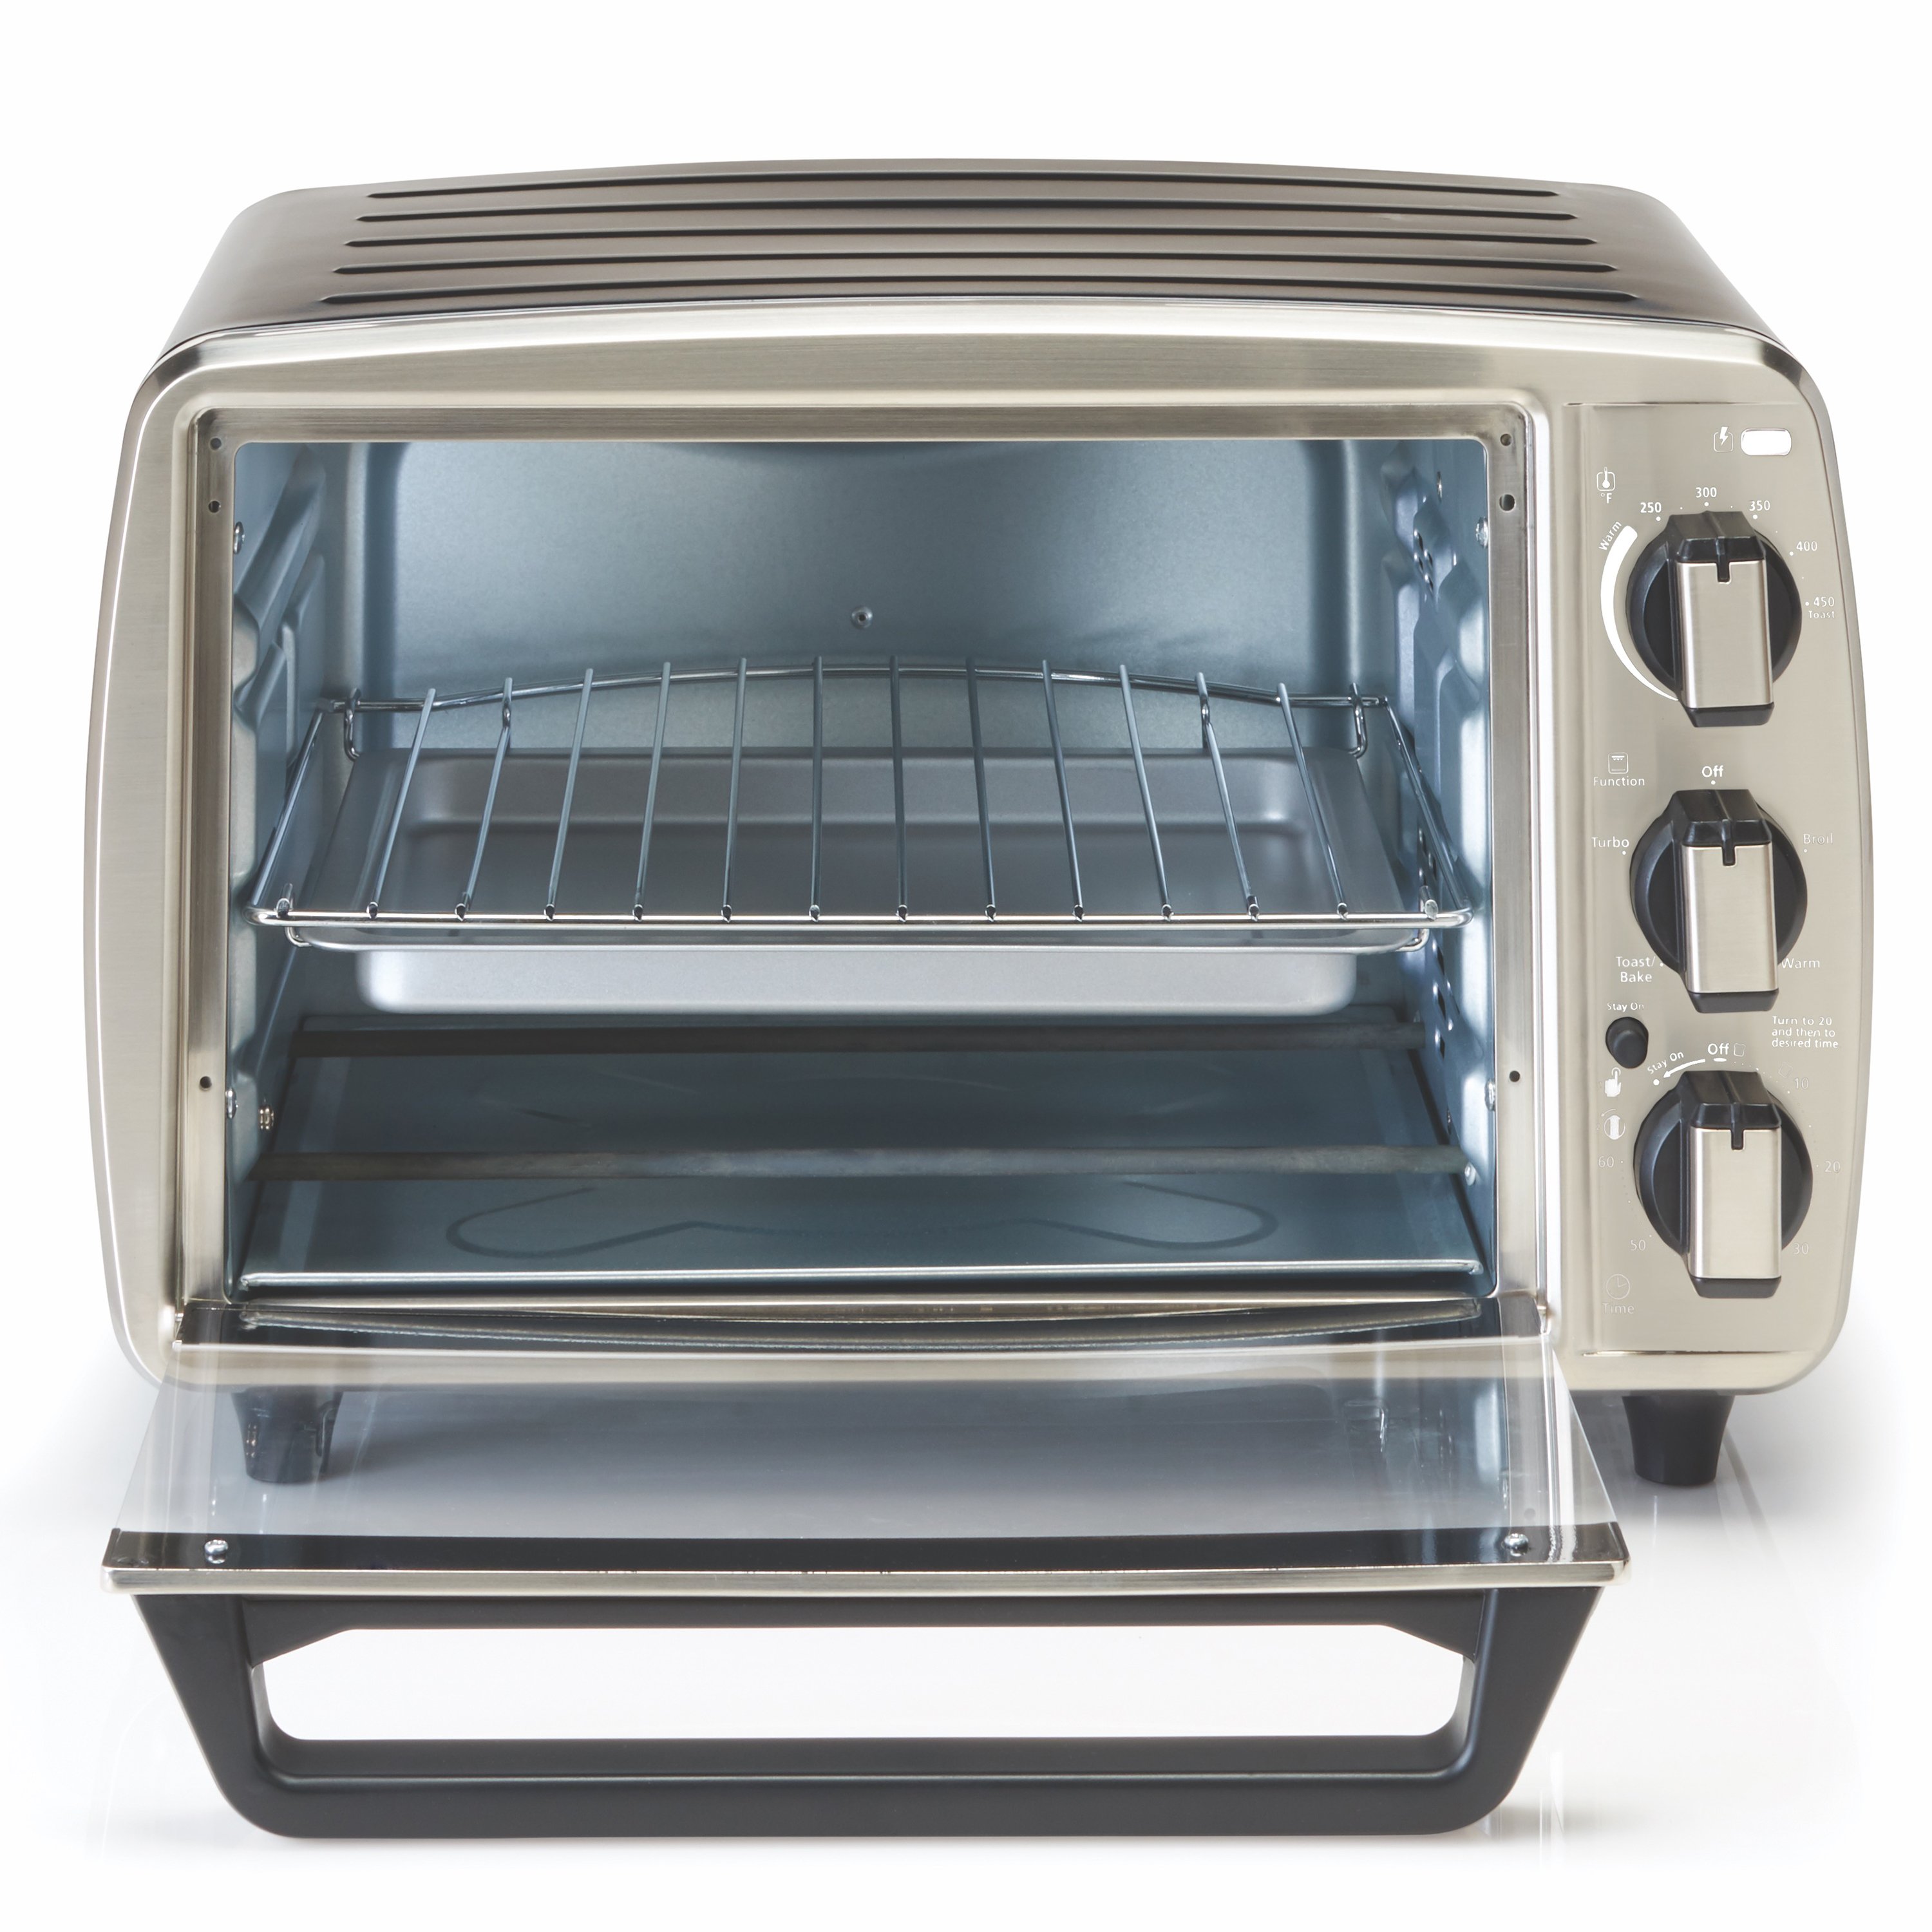 FREE SHIPPING NEW OSTER COUNTER TOP CONVECTION TOASTER OVEN 